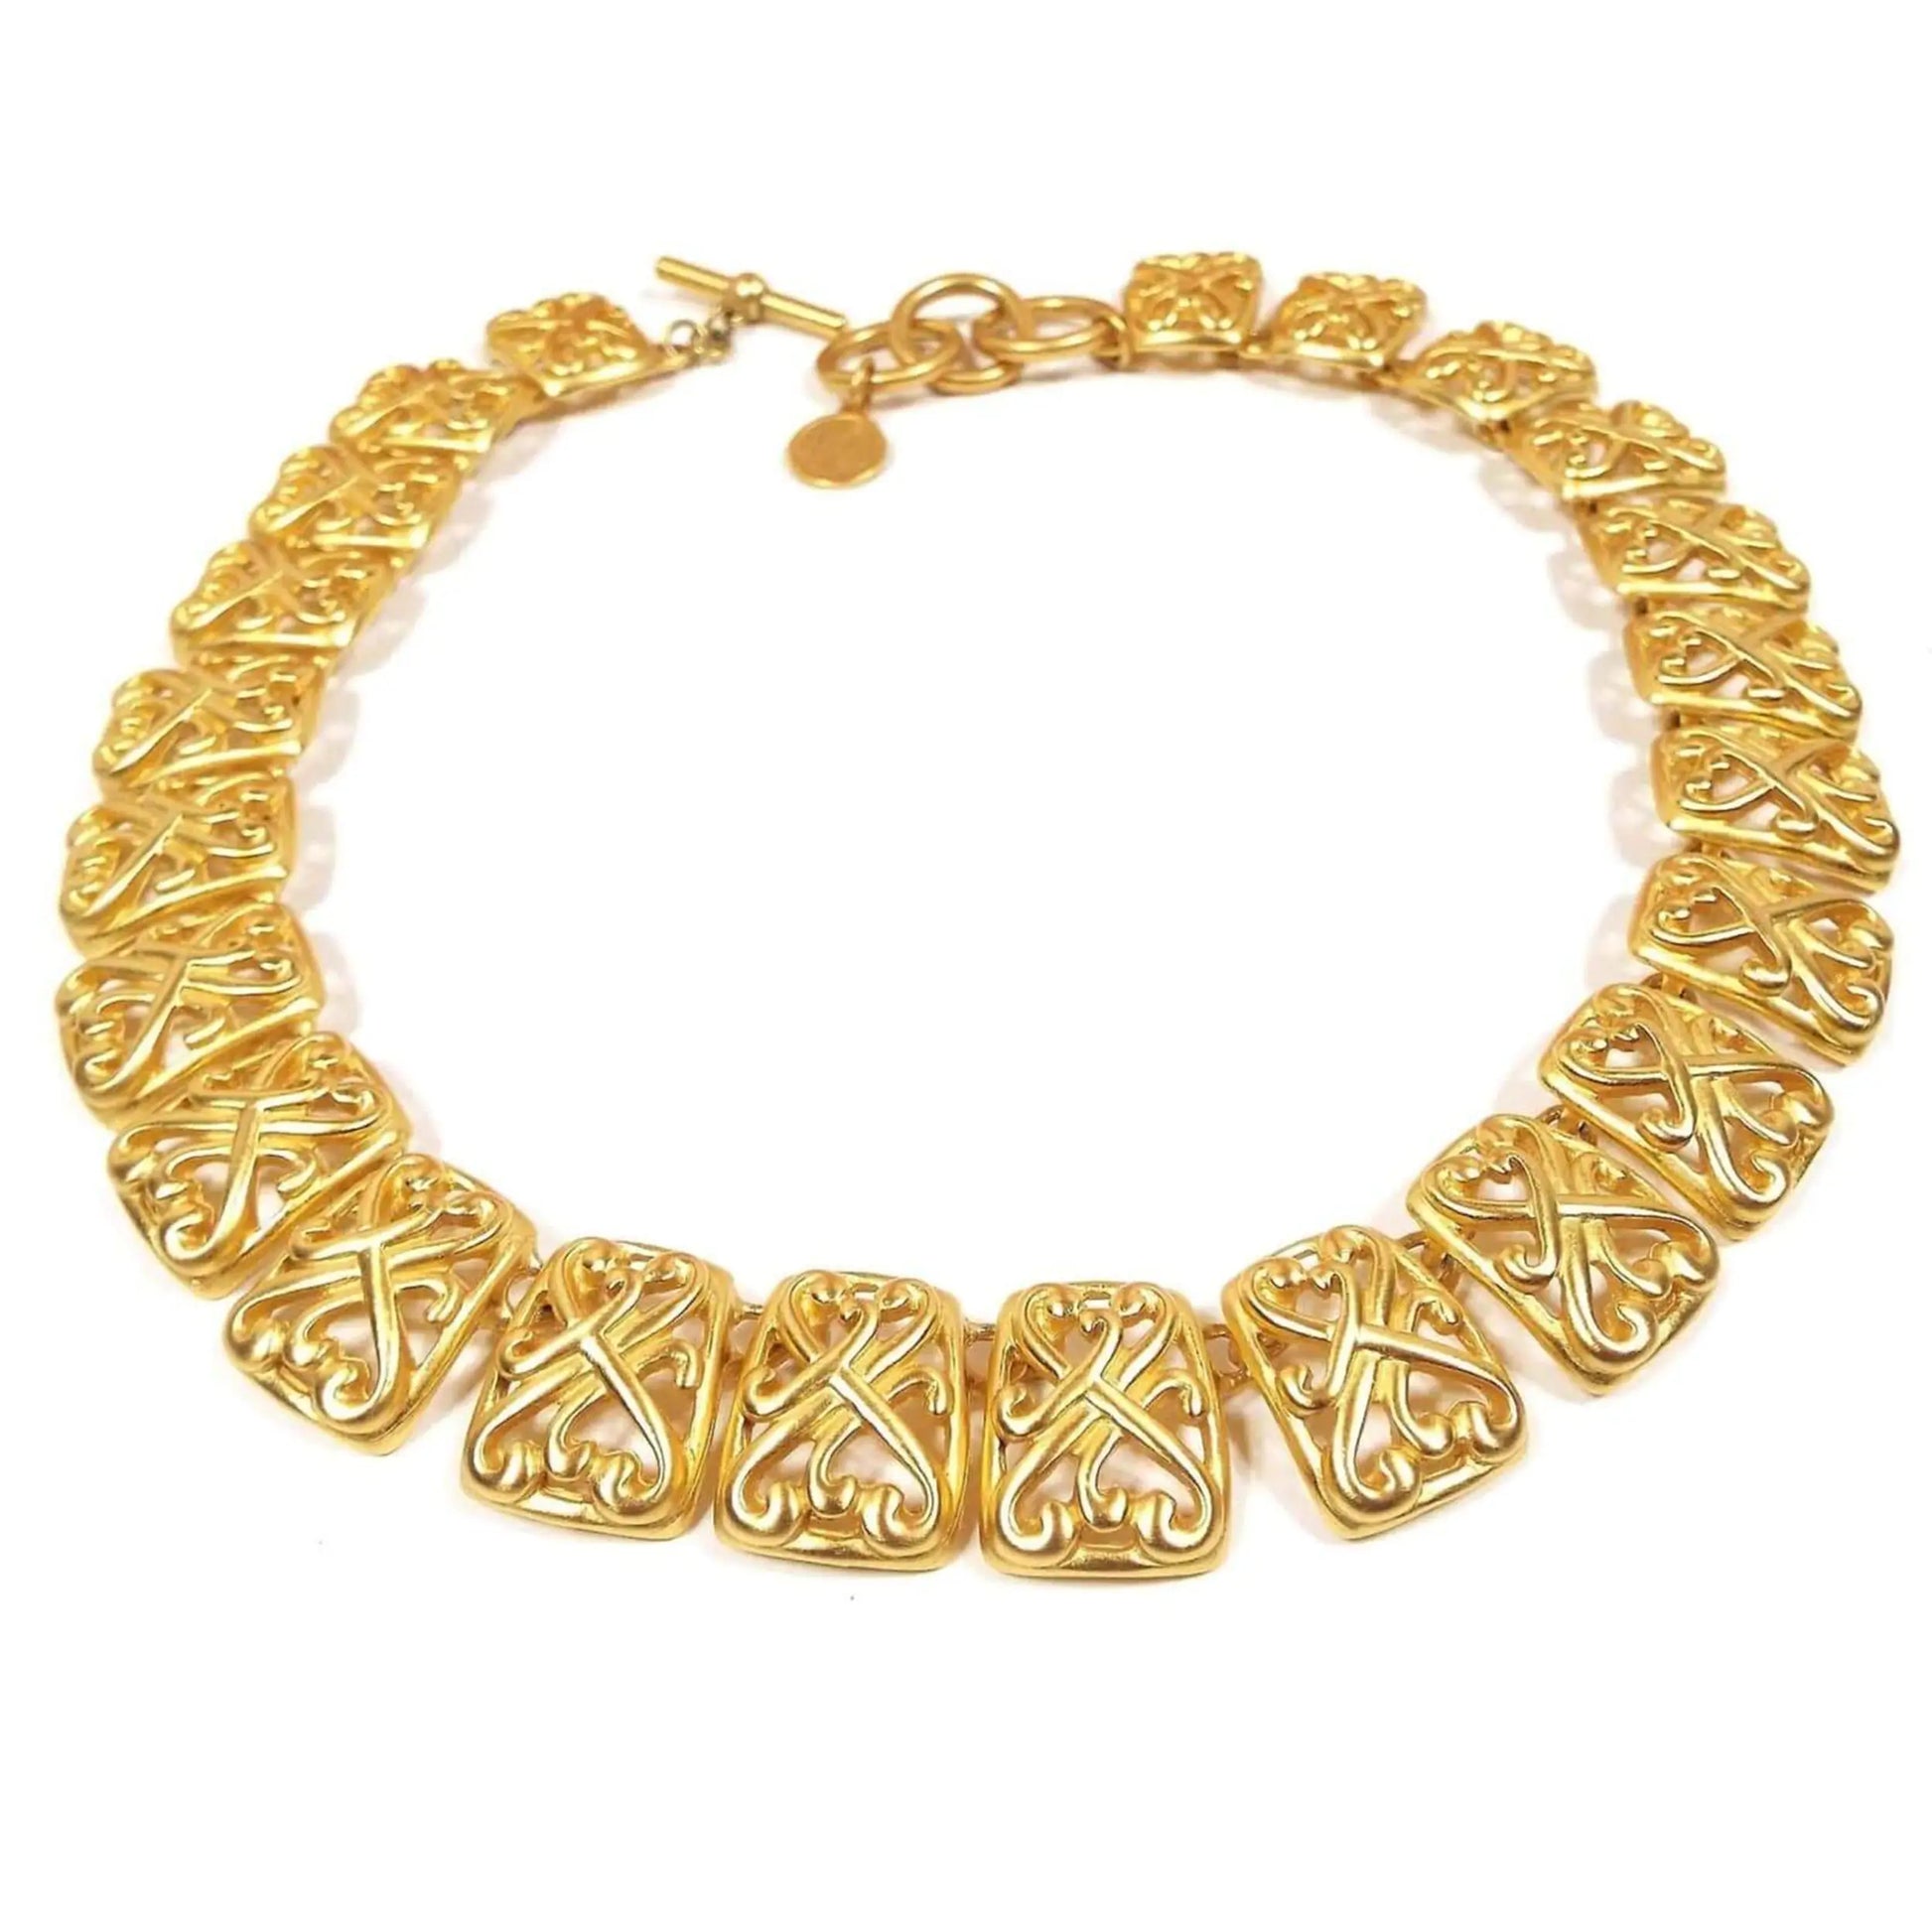 Top view of the retro vintage Anne Klein link necklace. It is gold tone in color with large rectangle links that have a curvy filigree design. There is a toggle clasp at the end with three large rings for it to go through to adjust the length.